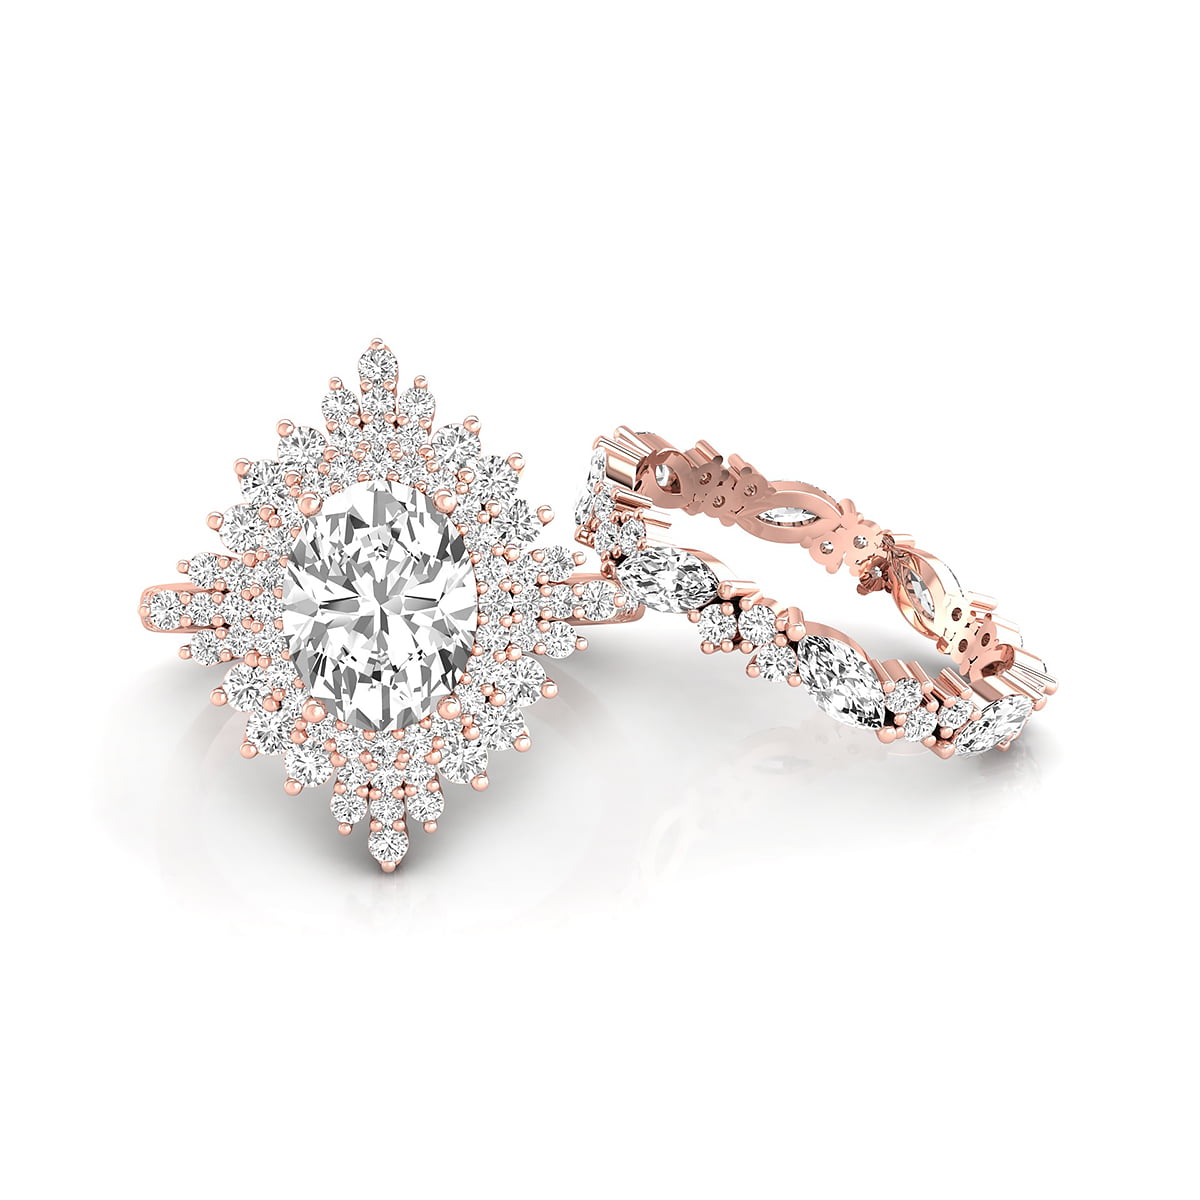 Oval-Marquise And Round Cut CZ Stone Starburst Halo Bridal Ring Set For Wedding (4 1/10 TCW)